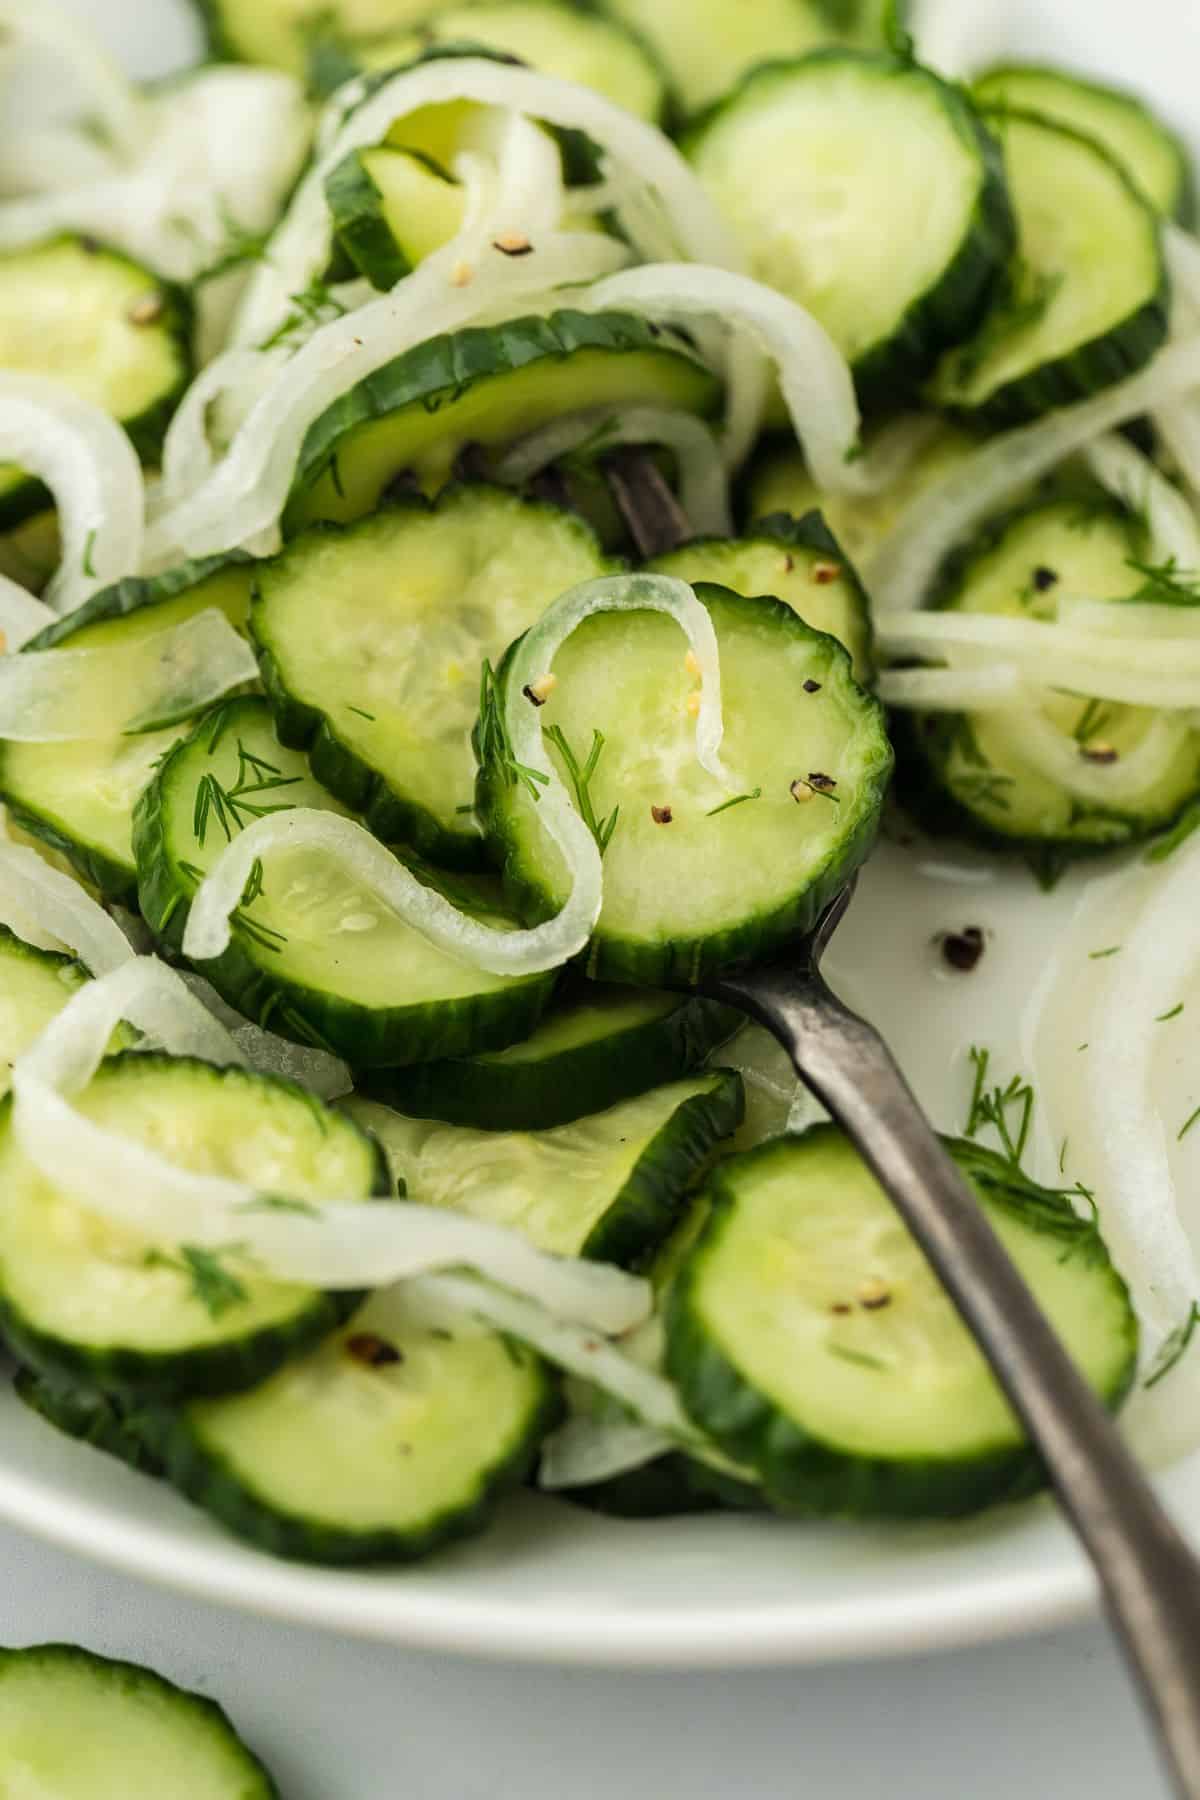 Closeup of a cucumber and onion salad garnished with fresh dill on a white bowl. A fork rests on the edge of the white bowl holding the salad